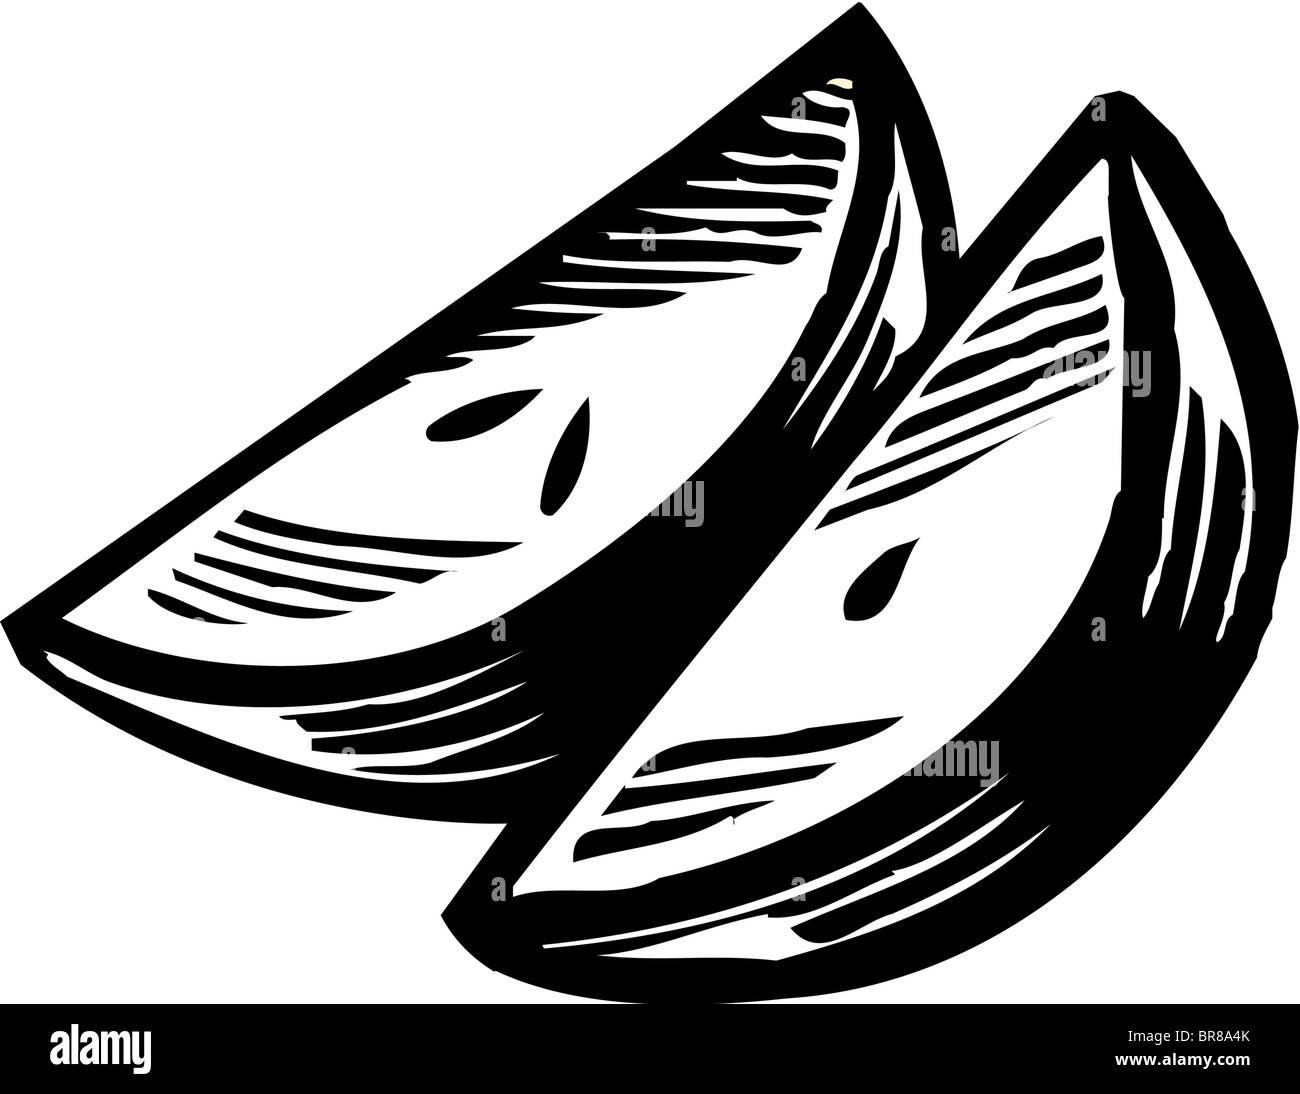 A drawing of two apple slices in black and white Stock Photo